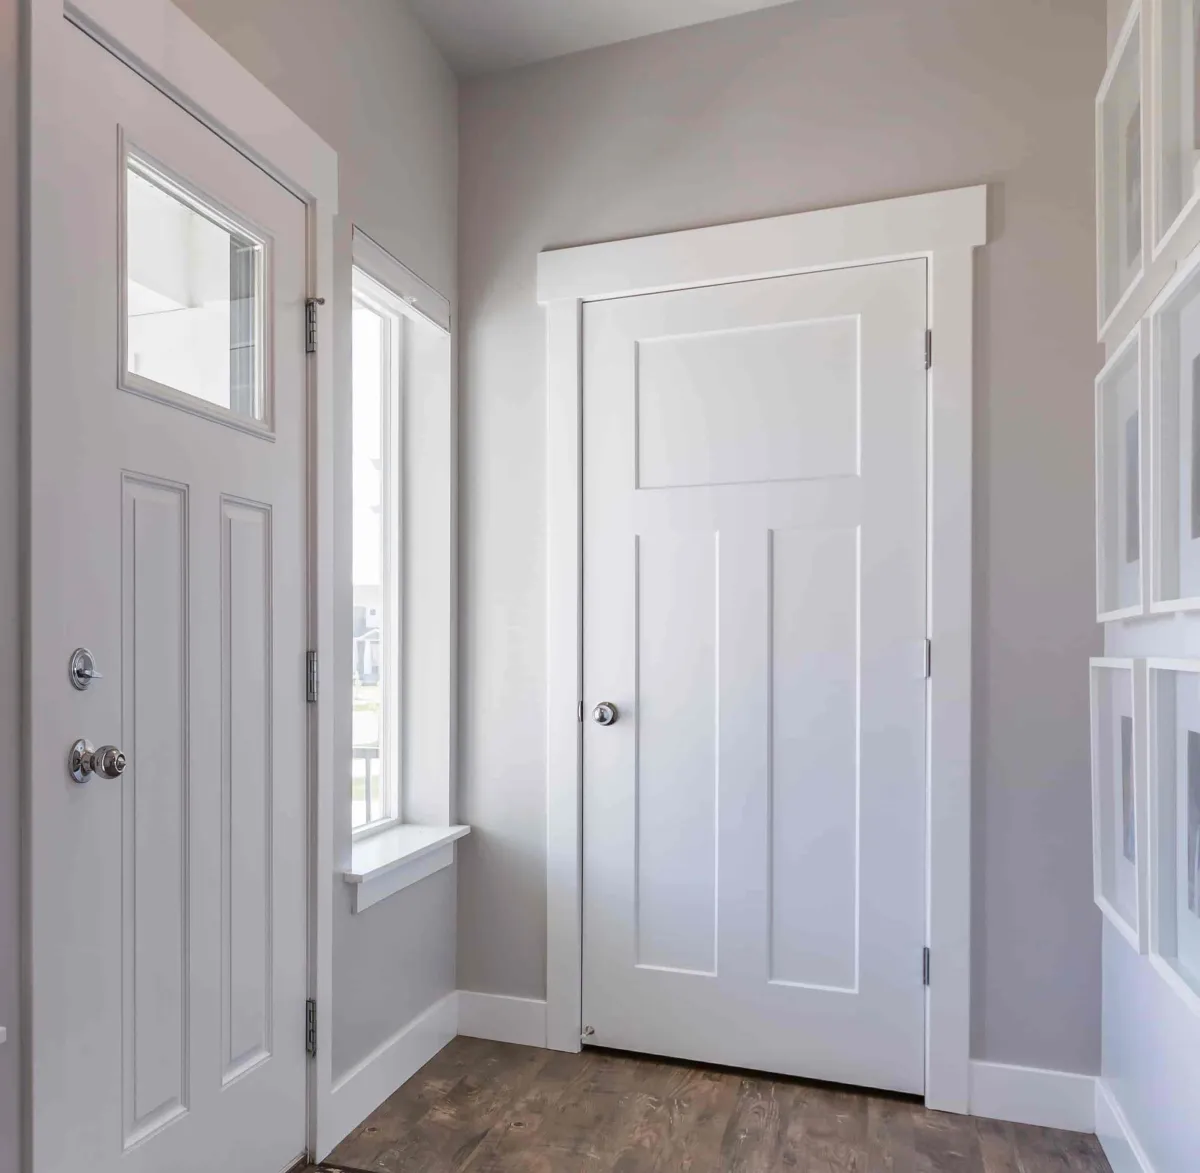 Residential Interior Painting Service for Doors and Trim